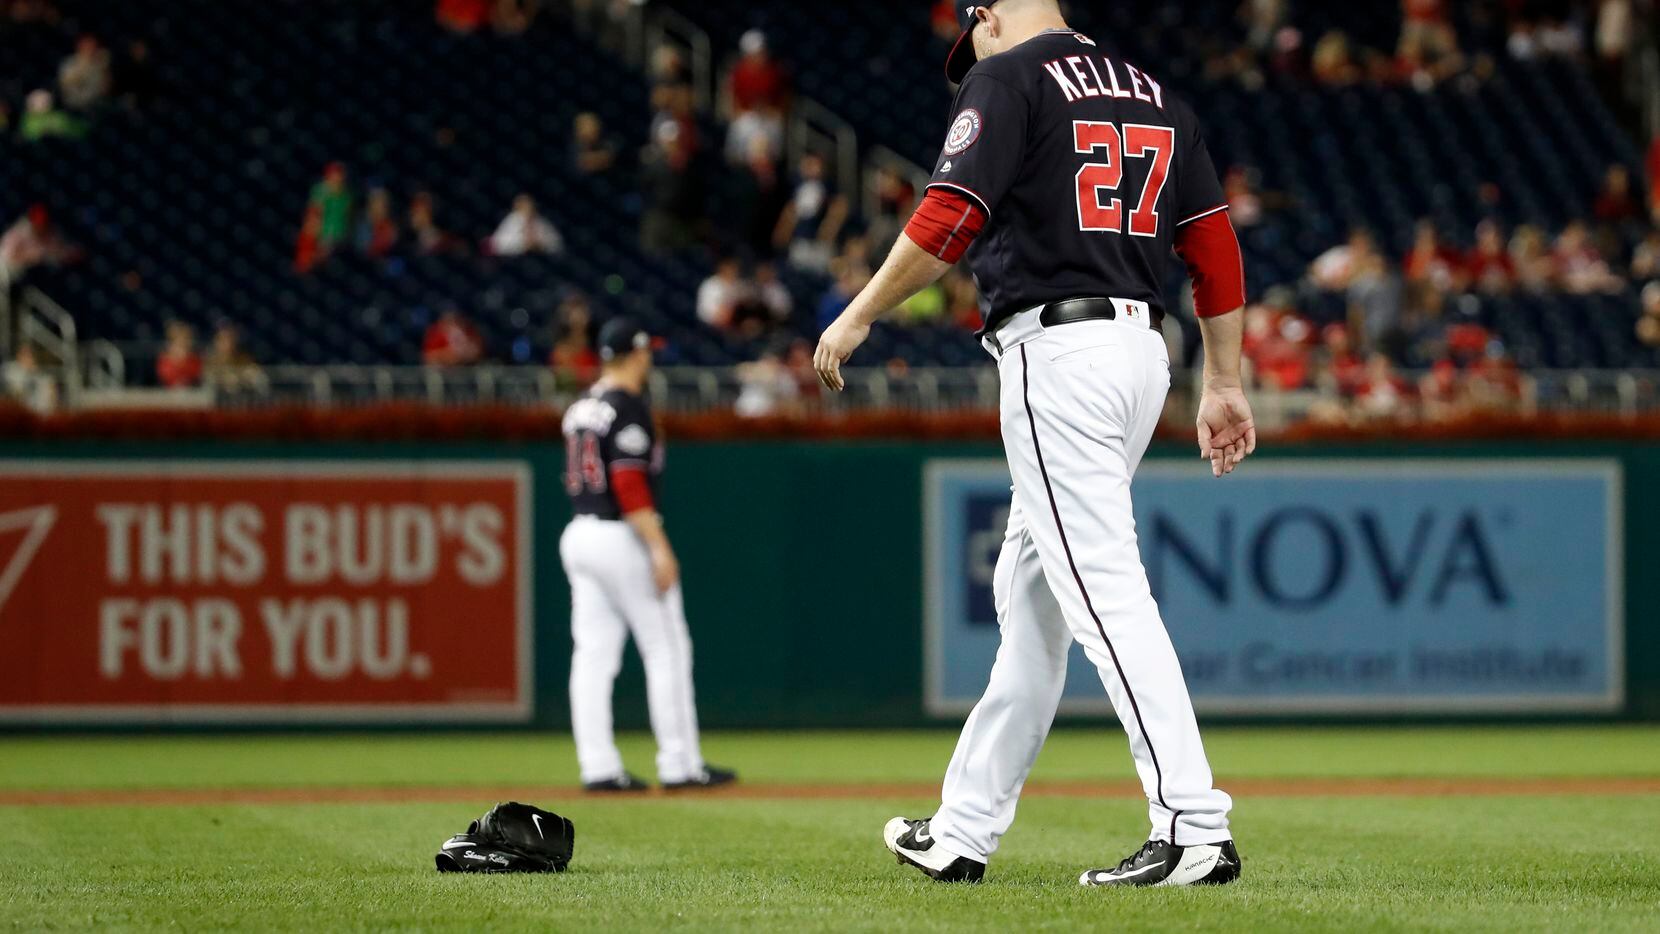 Washington Nationals relief pitcher Shawn Kelley (27) walks to pick up his glove after...